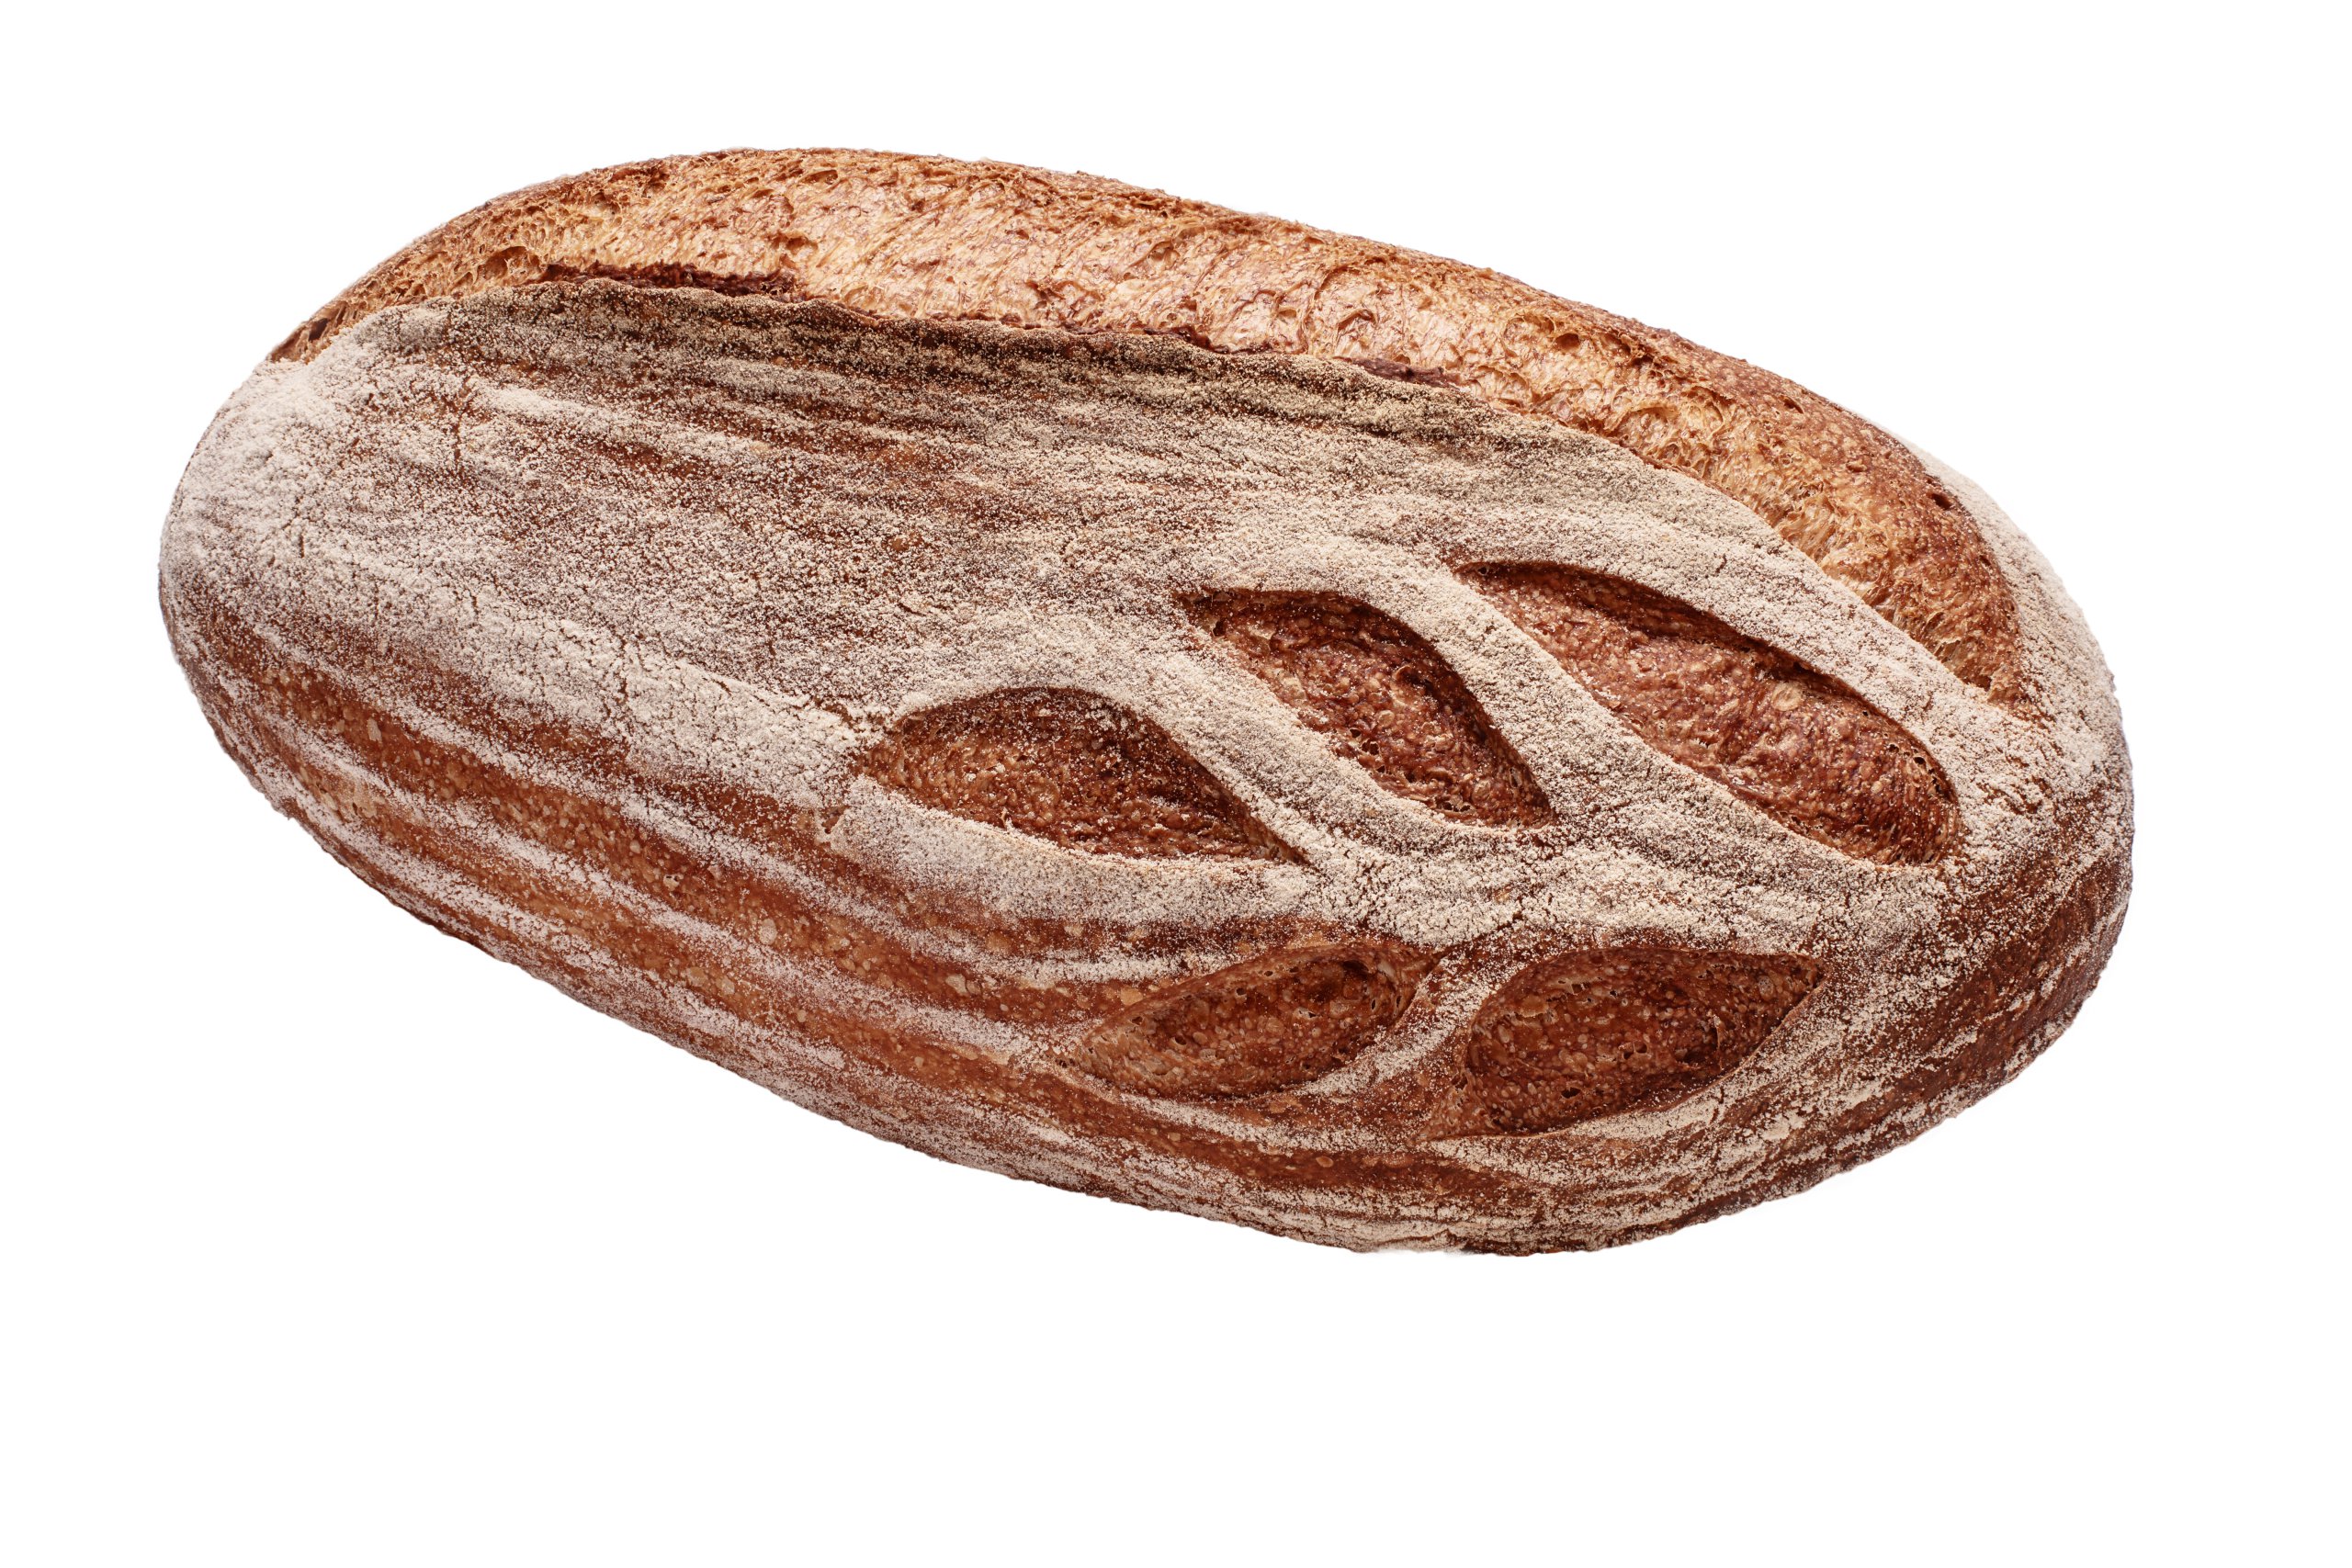 Whole,Spelt,Bread,Isolated,On,White,Background.